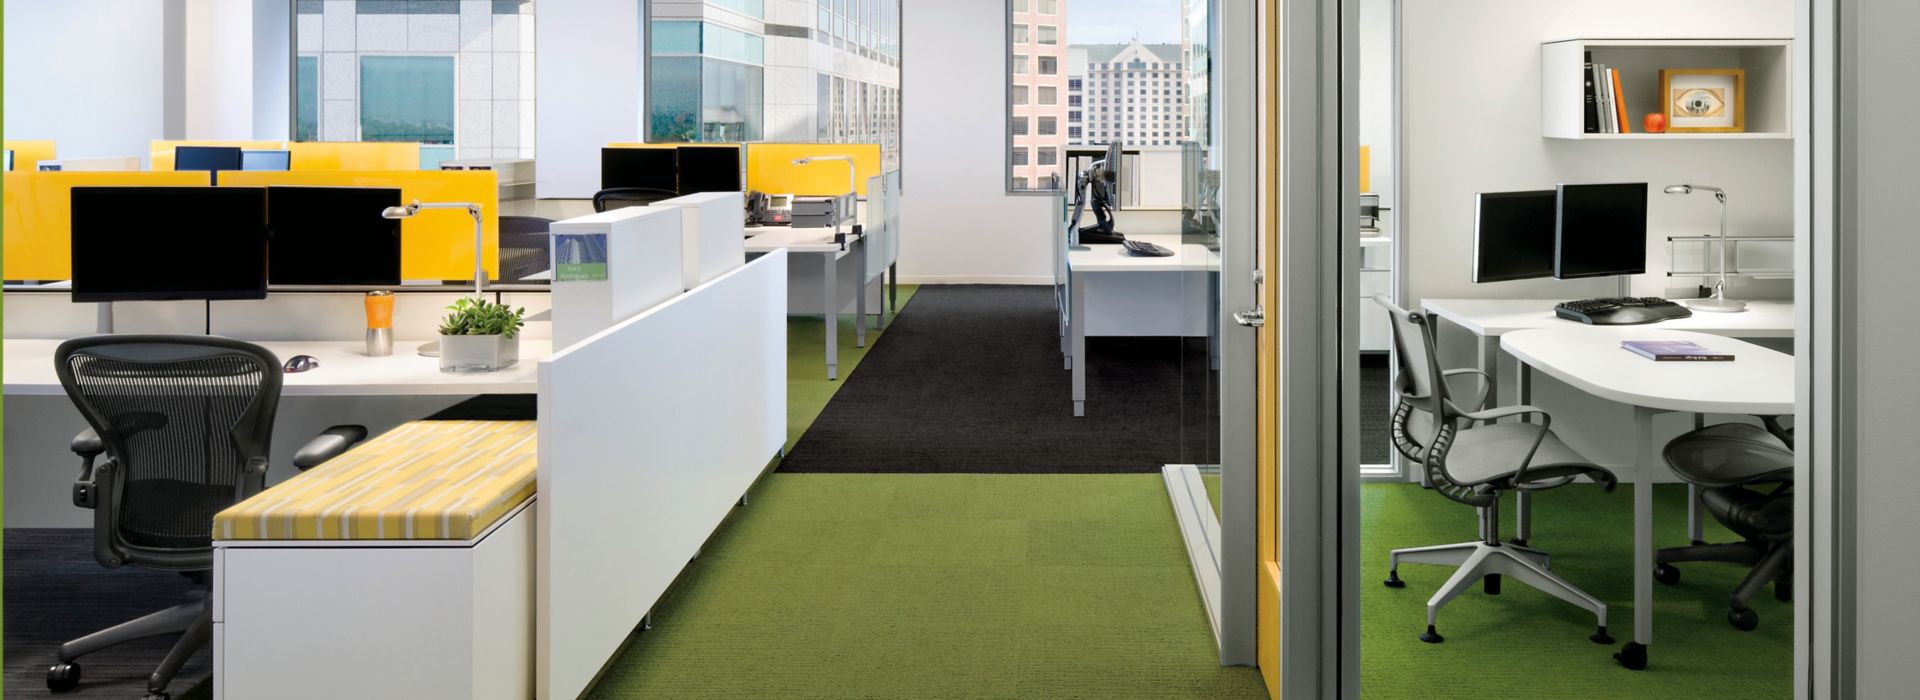 Interface Monochrome and Striation carpet tile in walkway of office with multiple open offices and a private office número de imagen 2